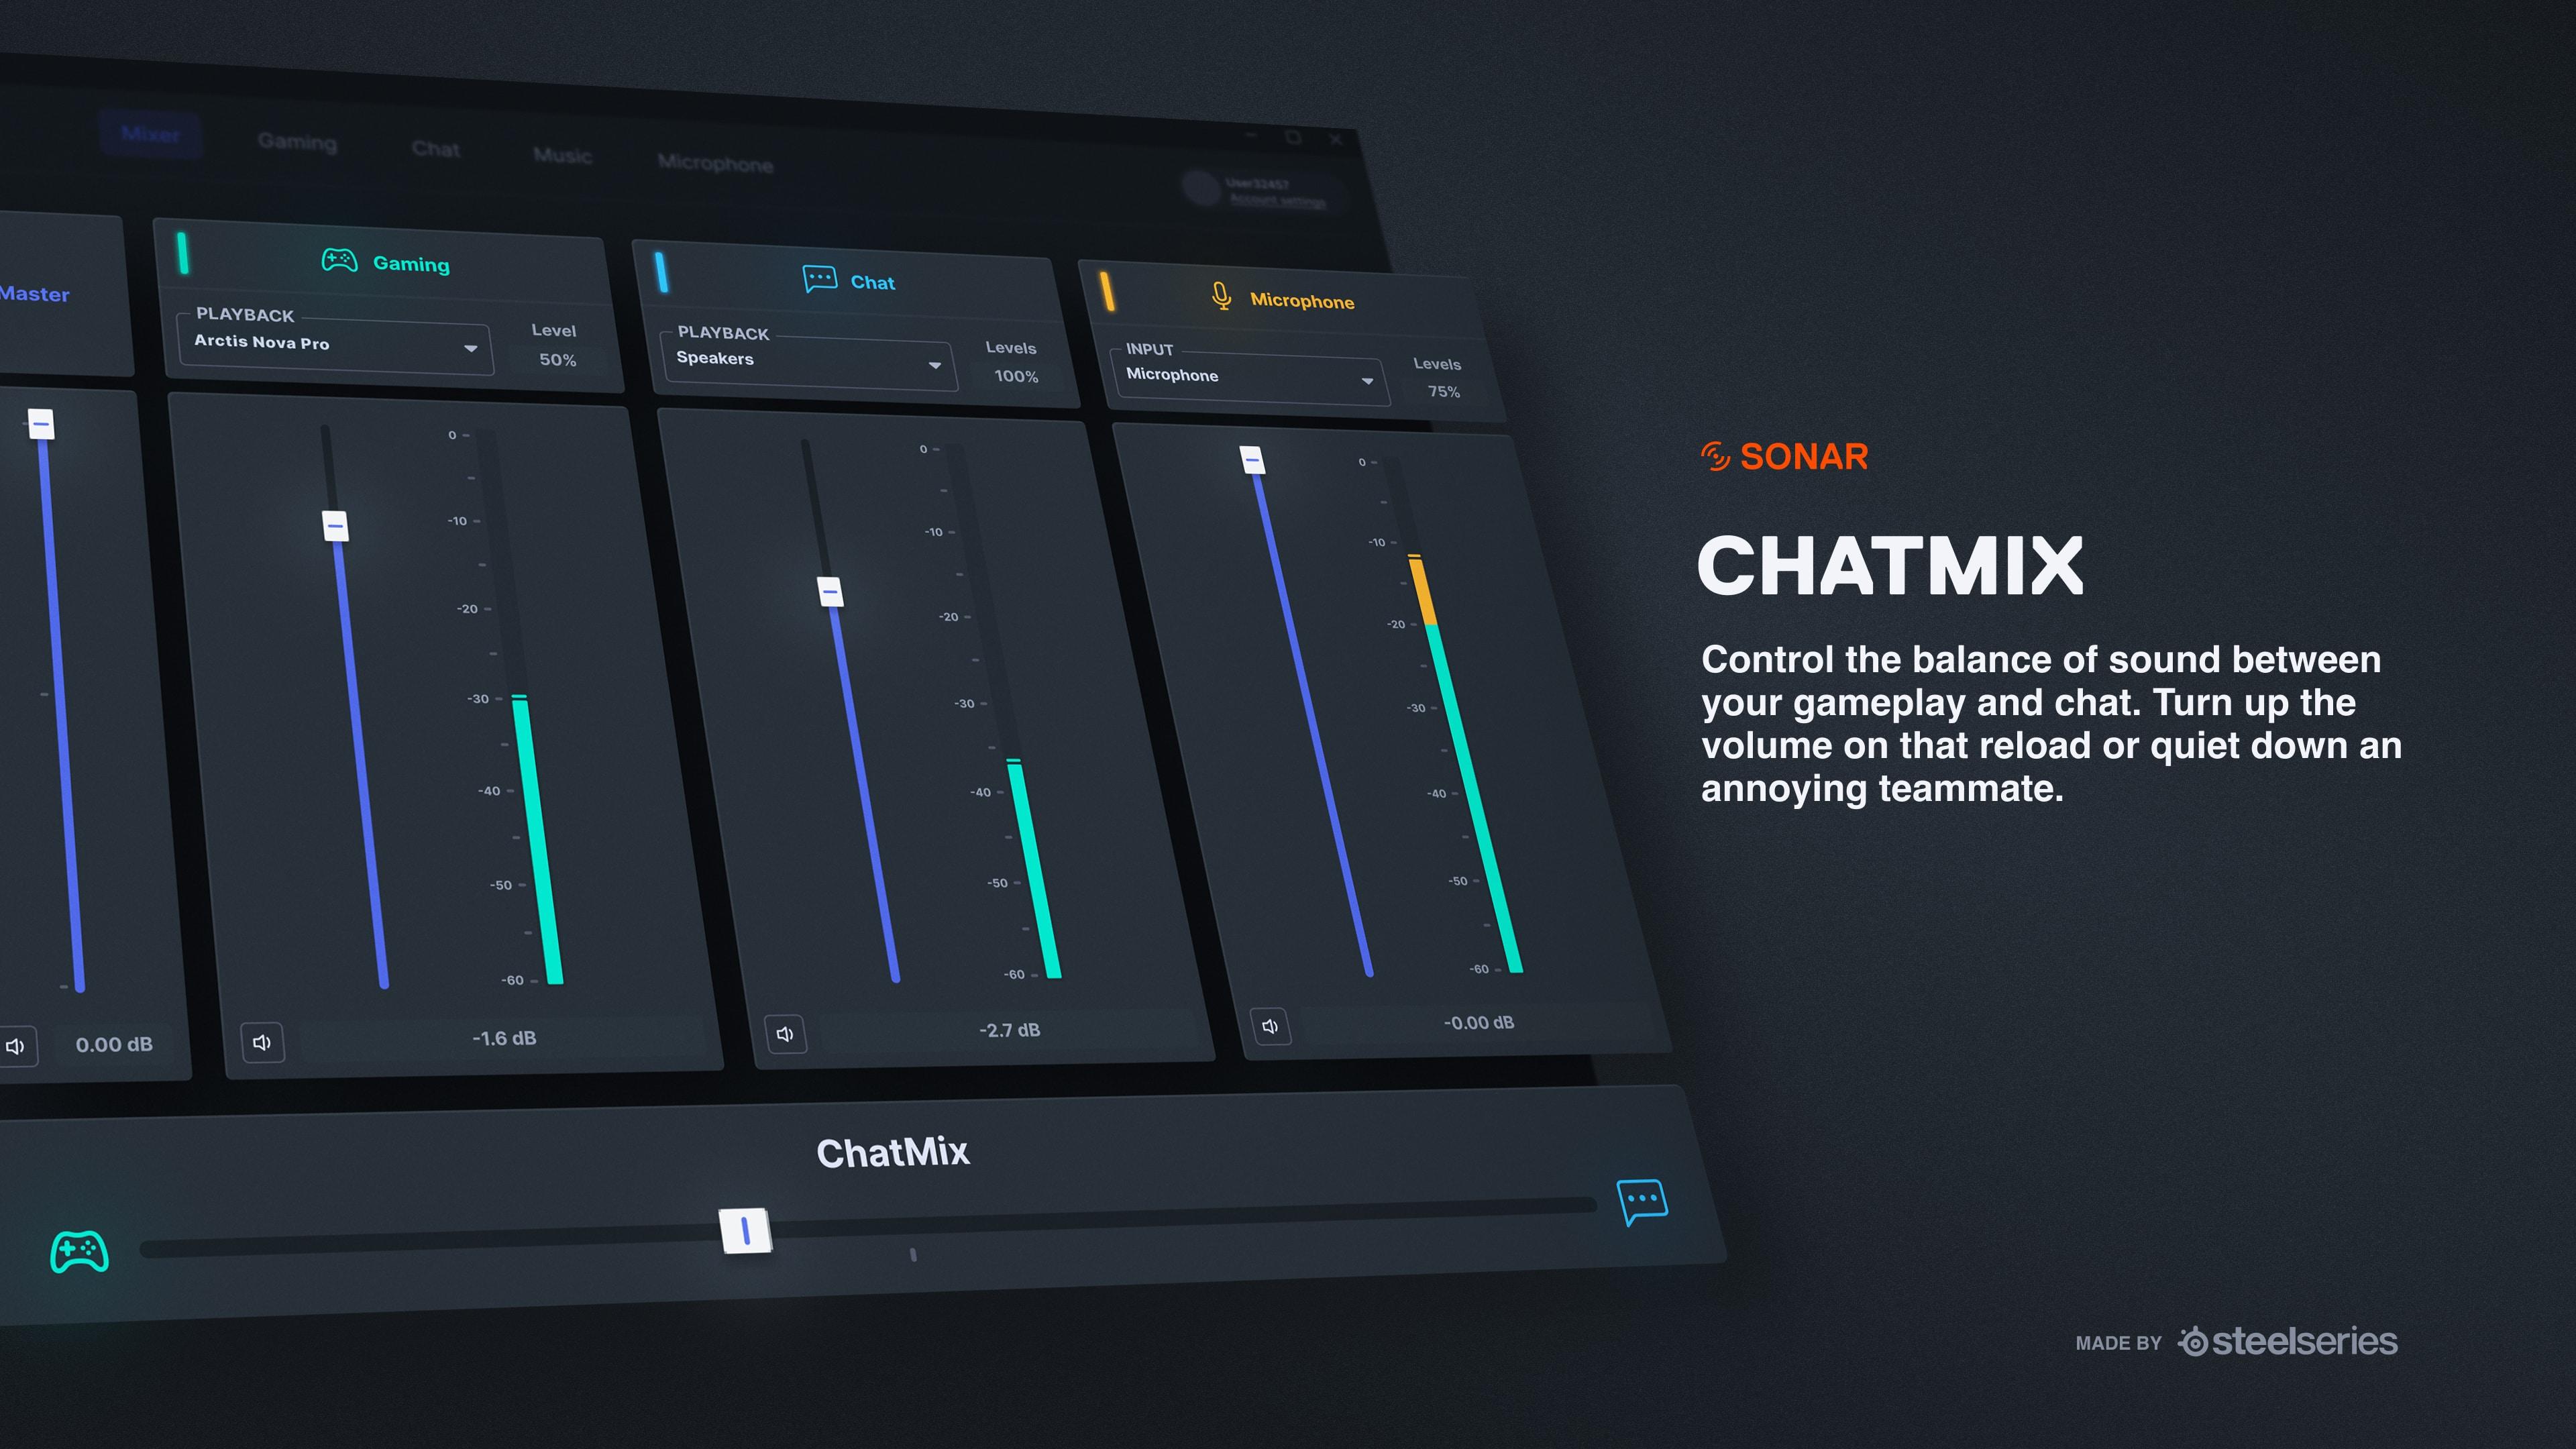 SteelSeries Sonar Chatmix software